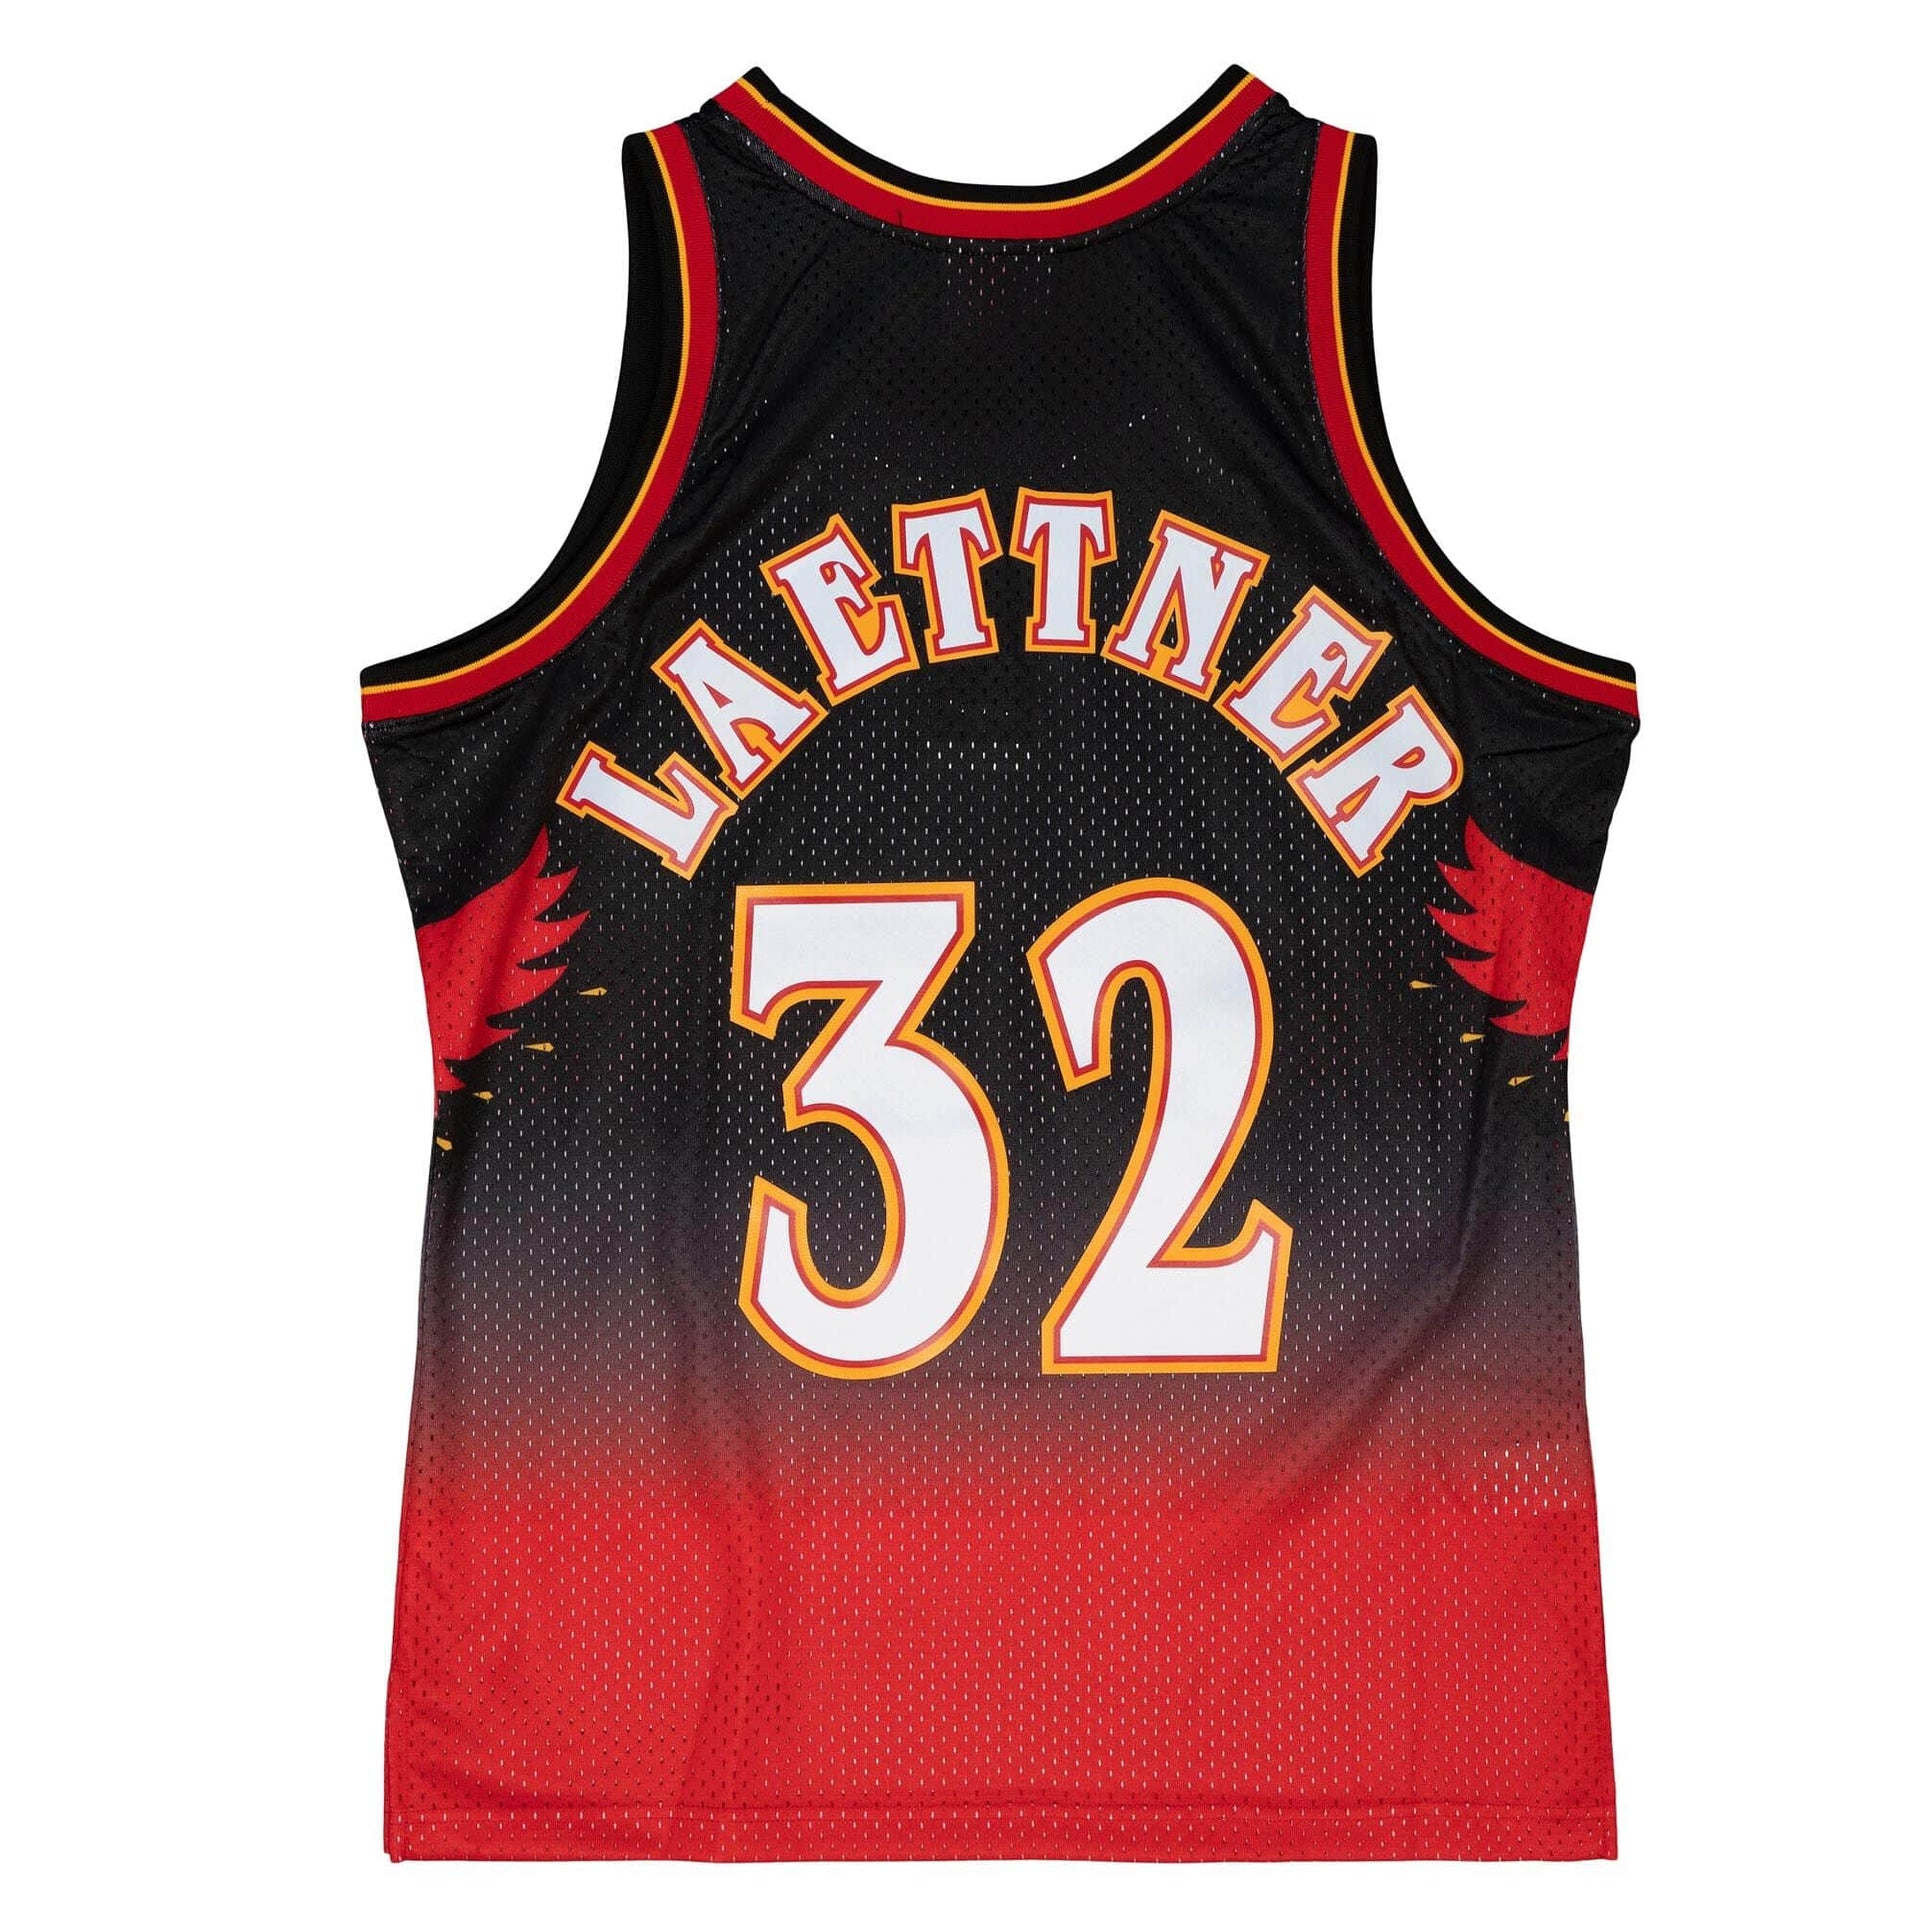 nba red jersey